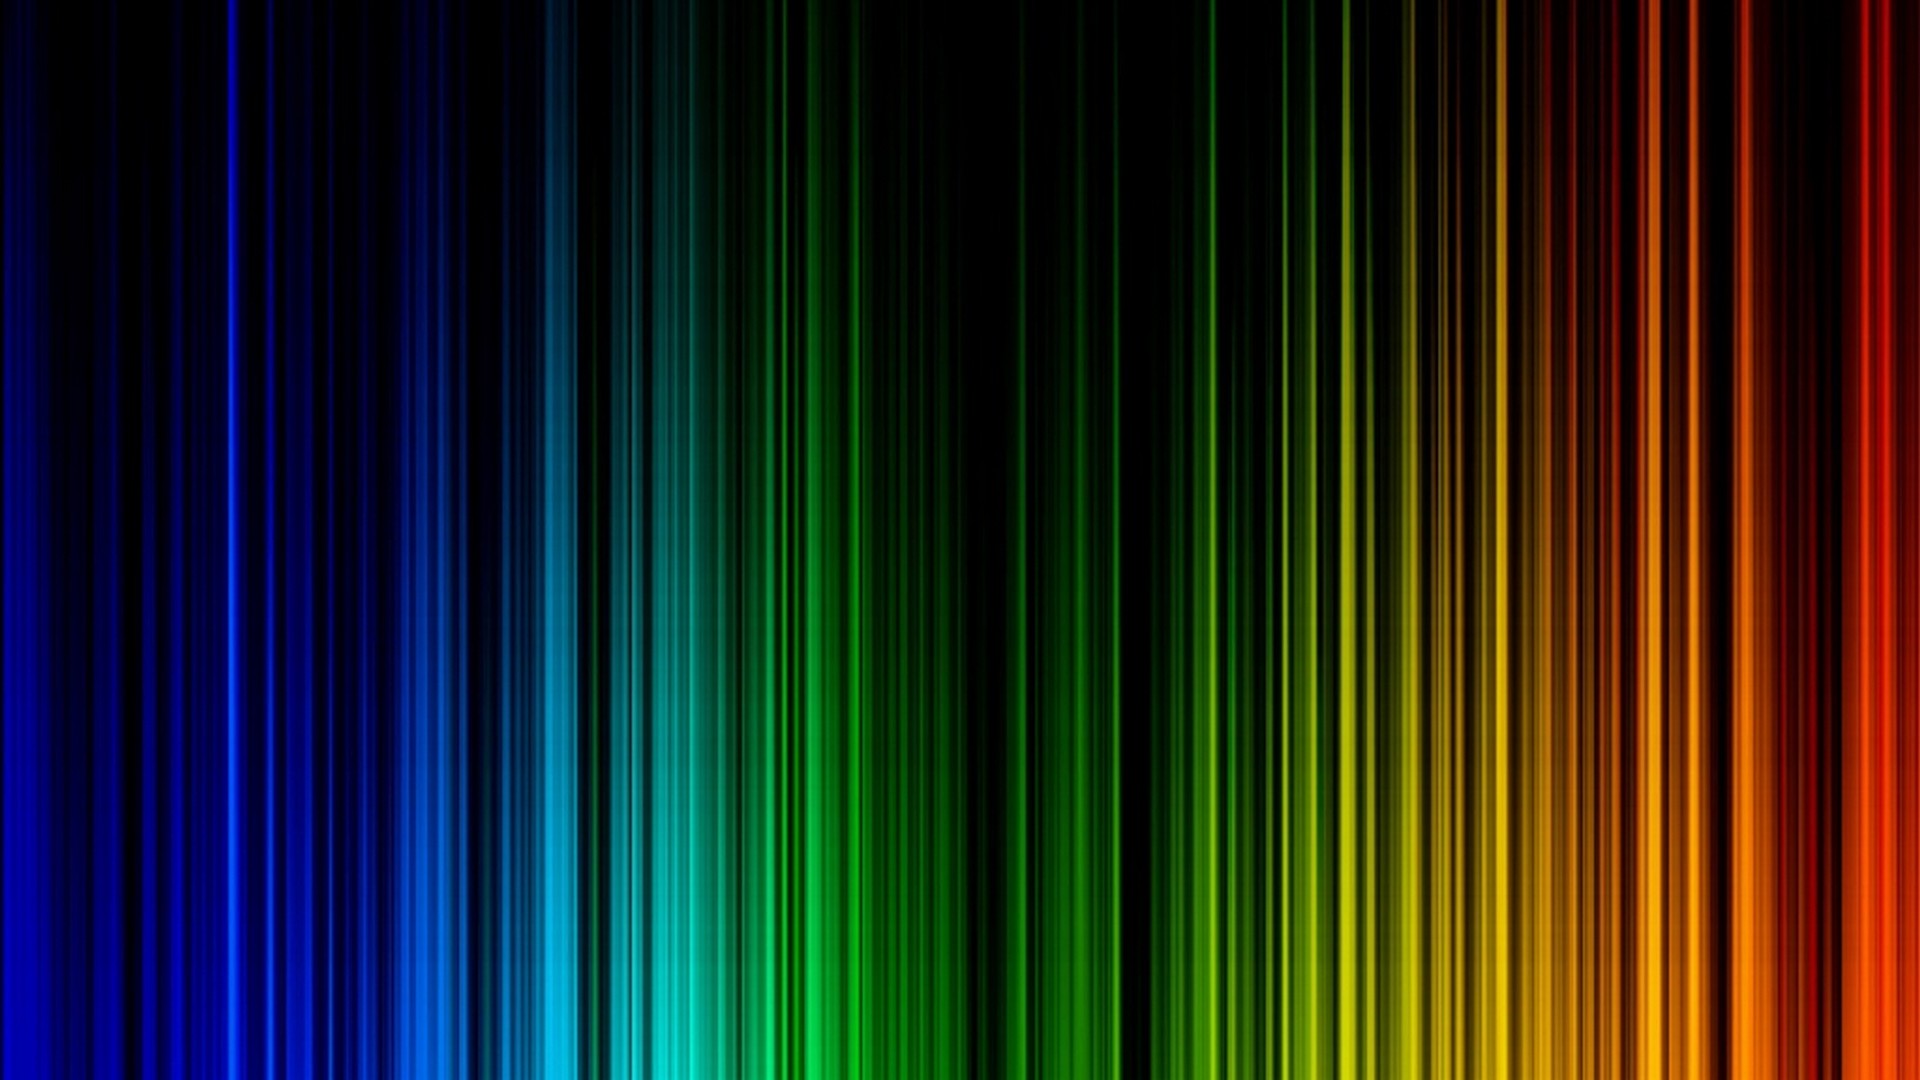 Rainbow HD Wallpaper With Resolution 1920X1080 pixel. You can make this wallpaper for your Desktop Computer Backgrounds, Mac Wallpapers, Android Lock screen or iPhone Screensavers